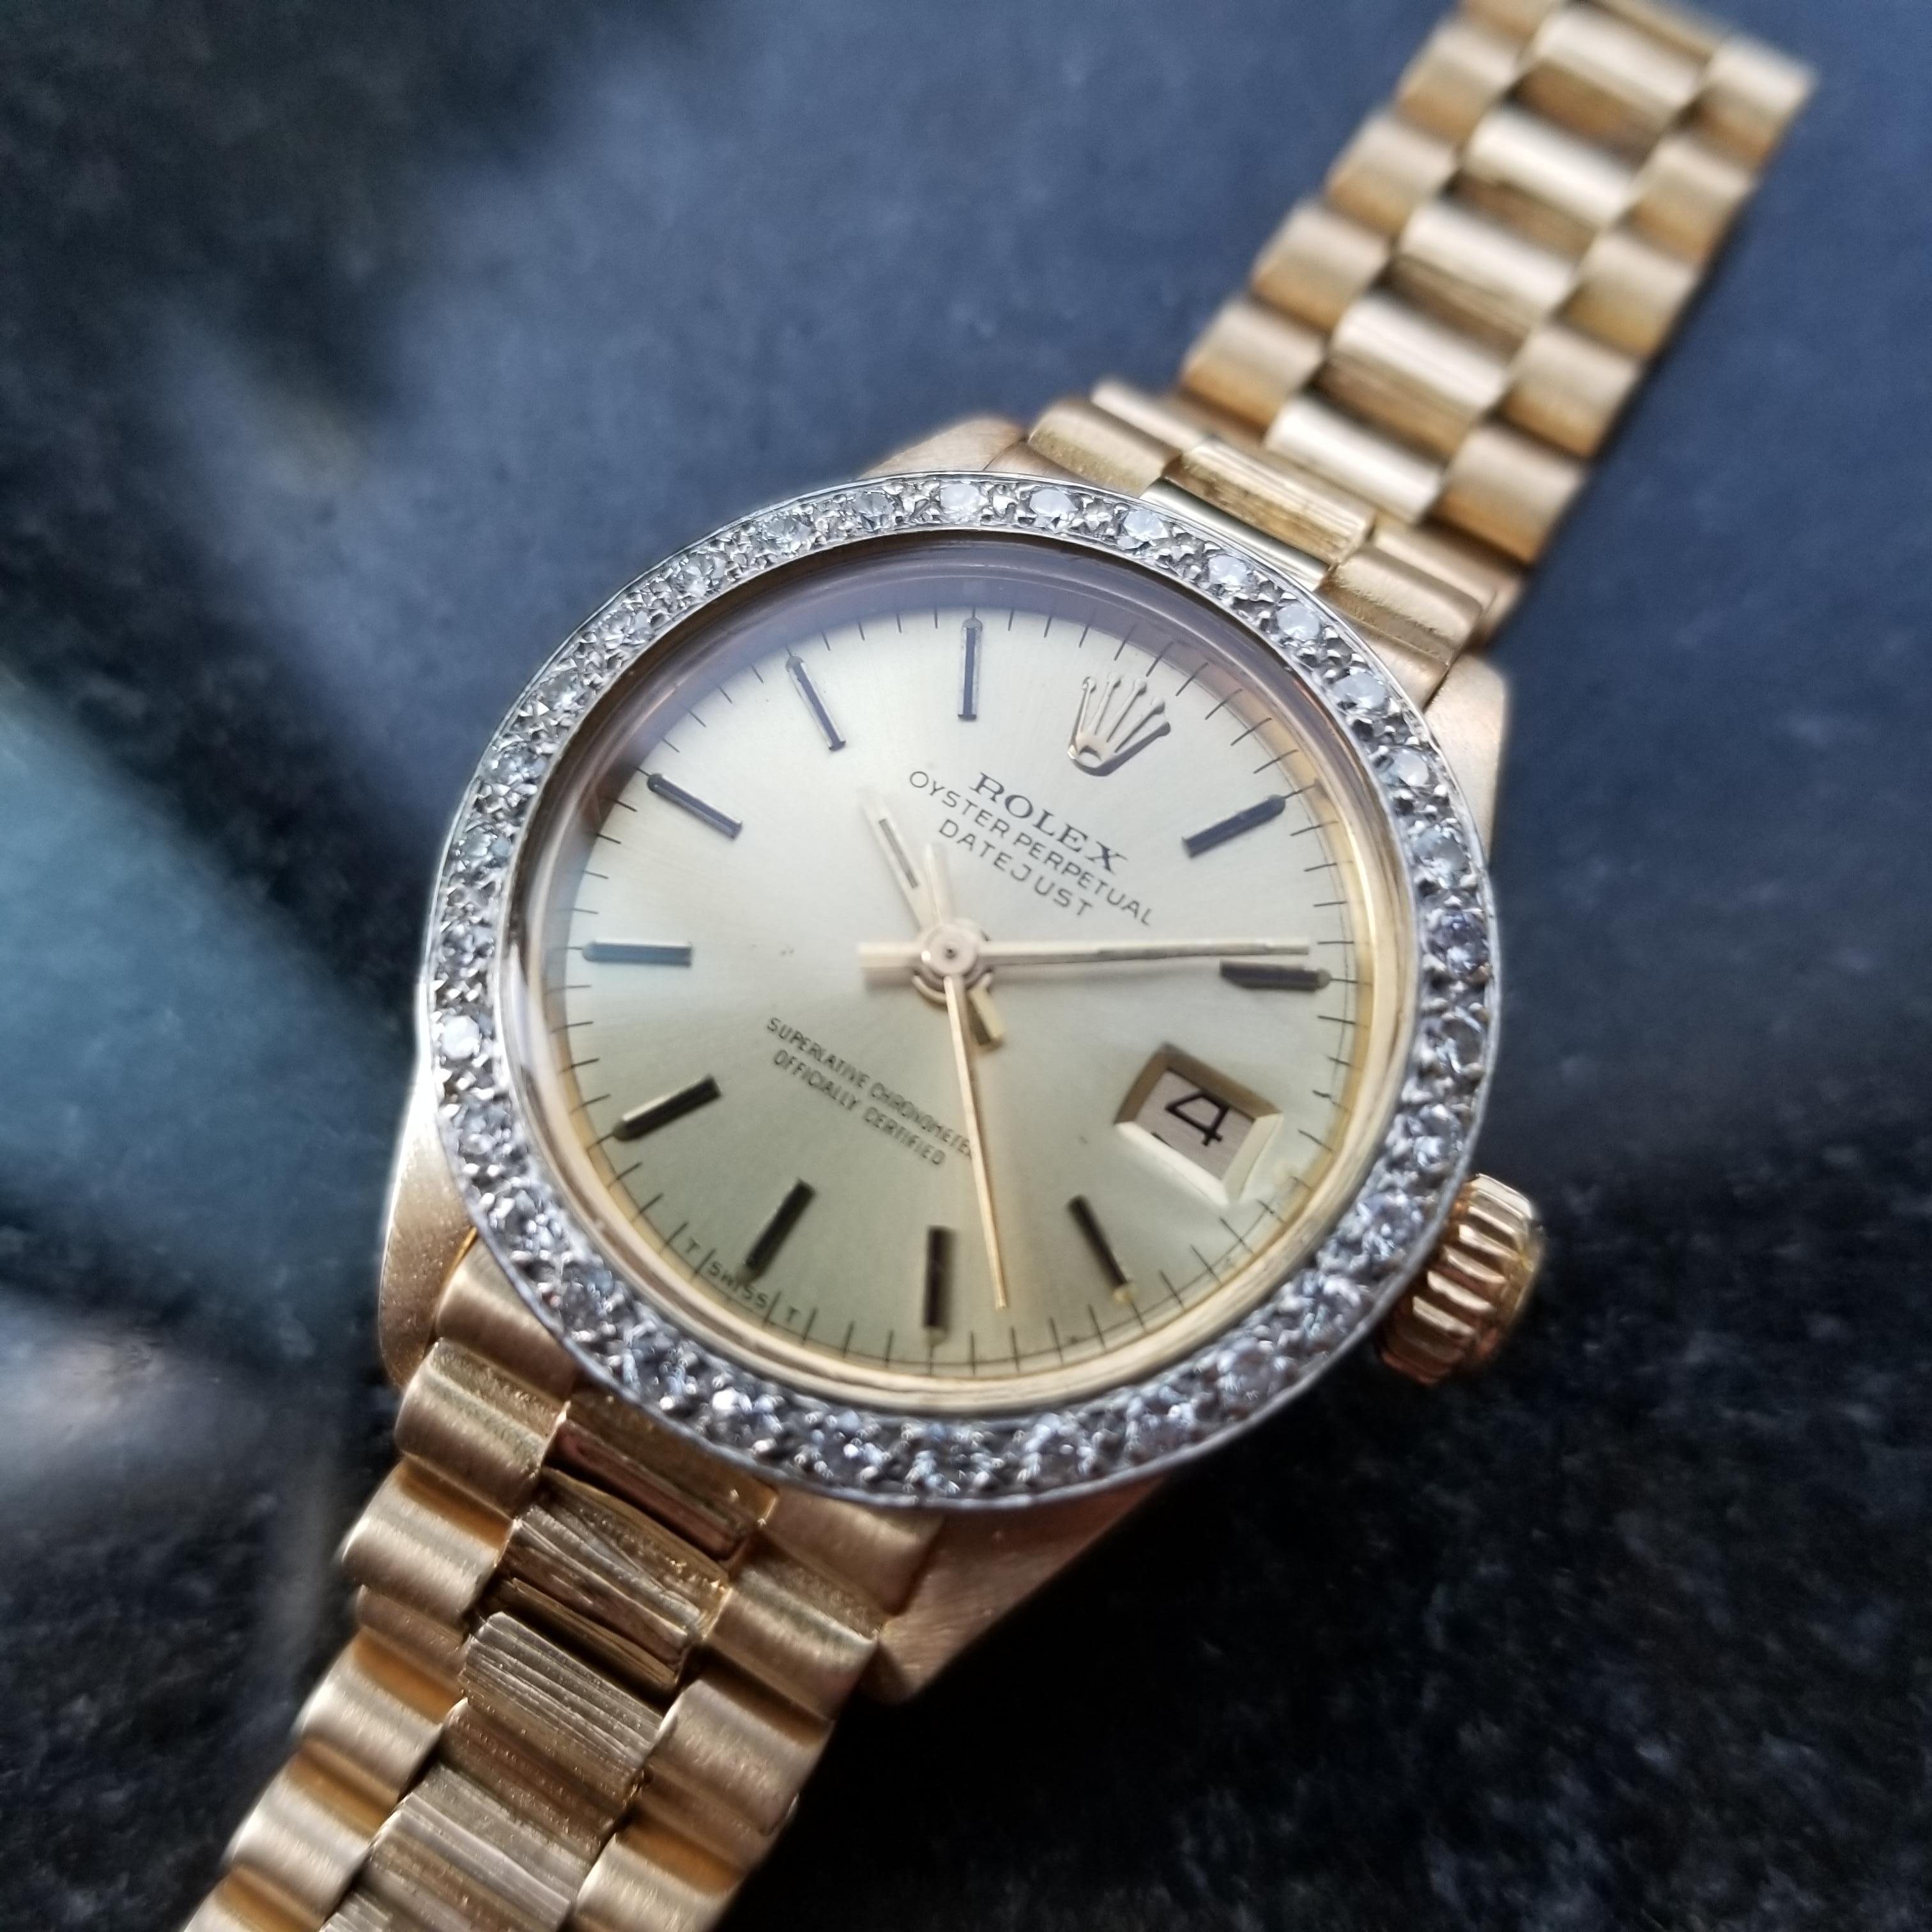 Luxurious elegance, 18k solid gold Rolex Oyster Perpetual Lady Datejust with diamond setting, c.1975, on original 18k gold bracelet. Verified authentic by a master watchmaker. Gorgeous gold Rolex signed dial, applied indice hour markers, gilt minute